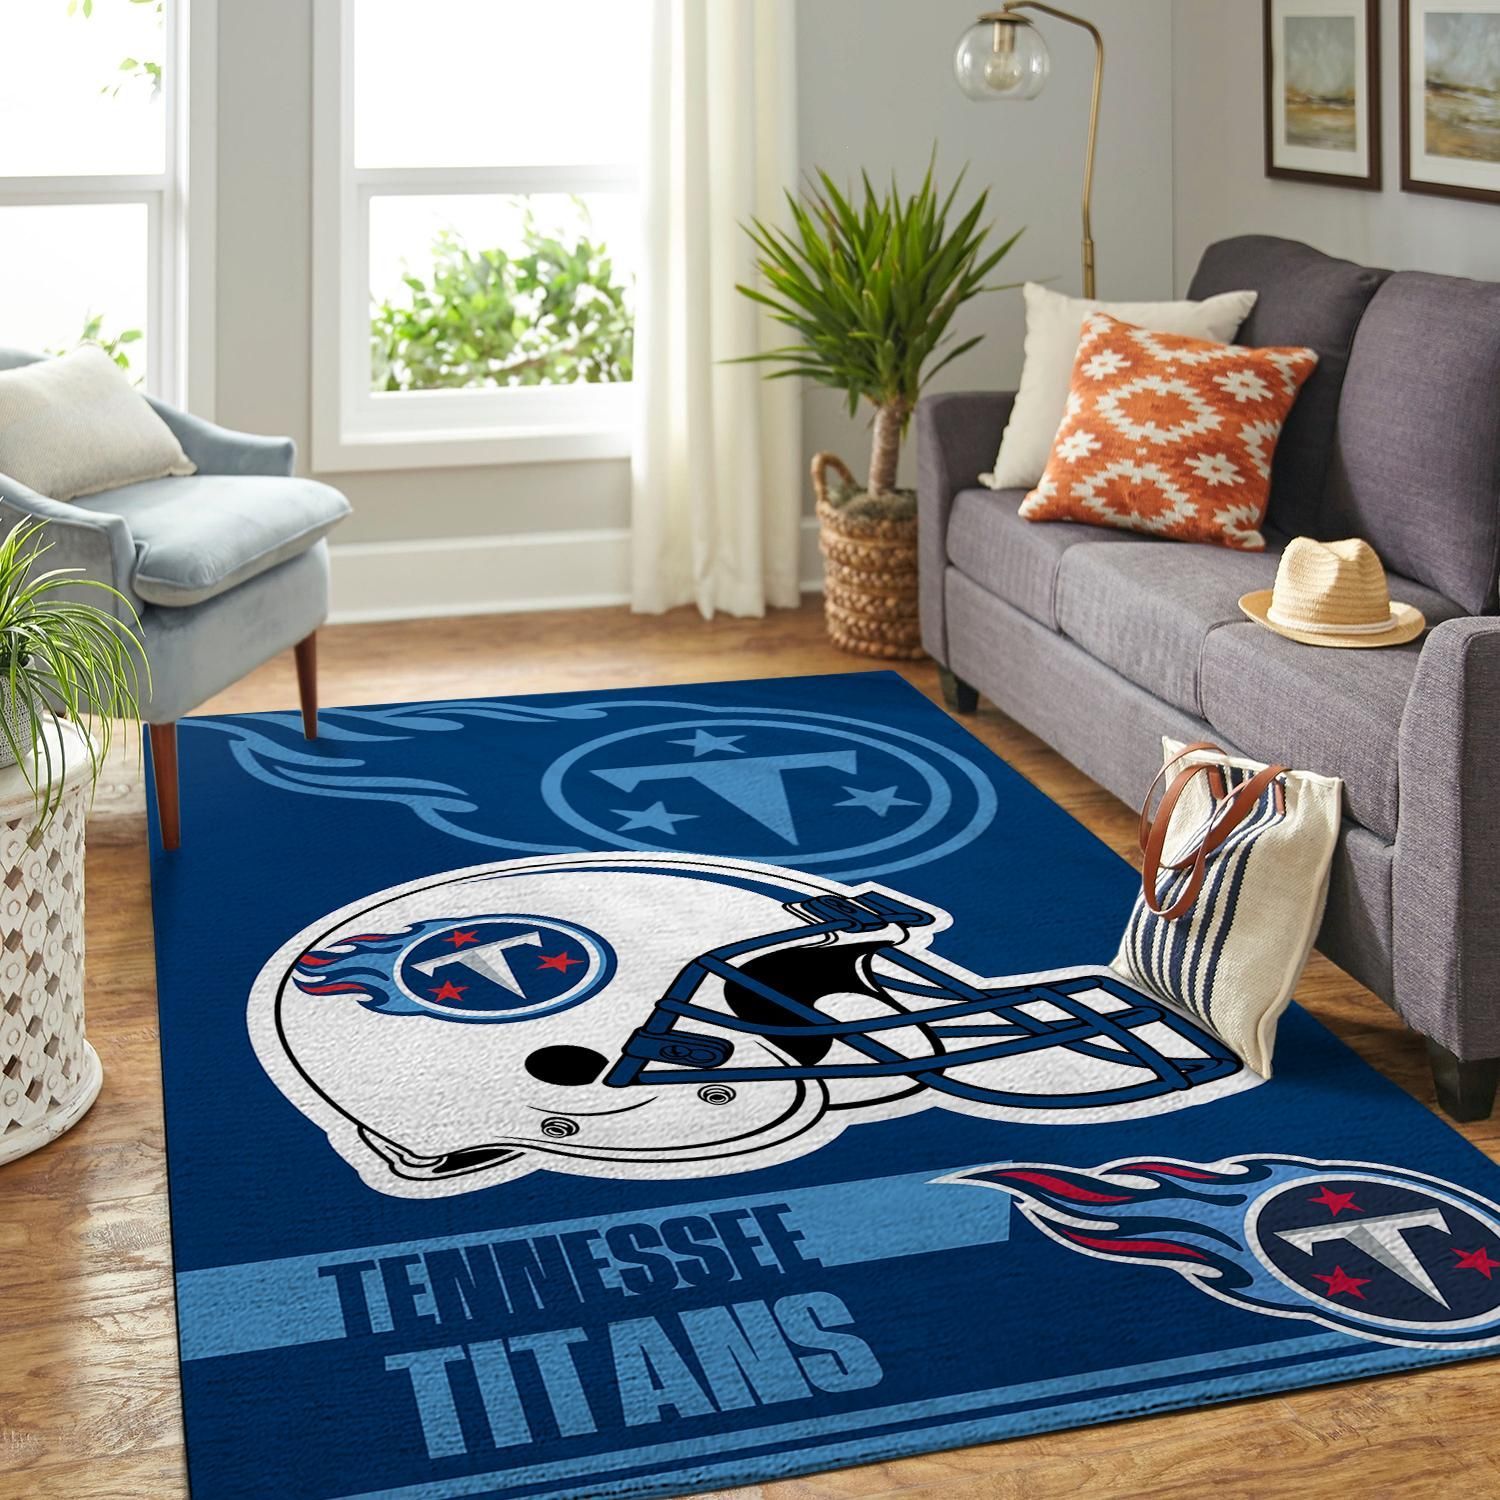 Tennessee Titans Nfl Team Logo Helmet Nice Gift Home Decor Rectangle Area Rug - Indoor Outdoor Rugs 2